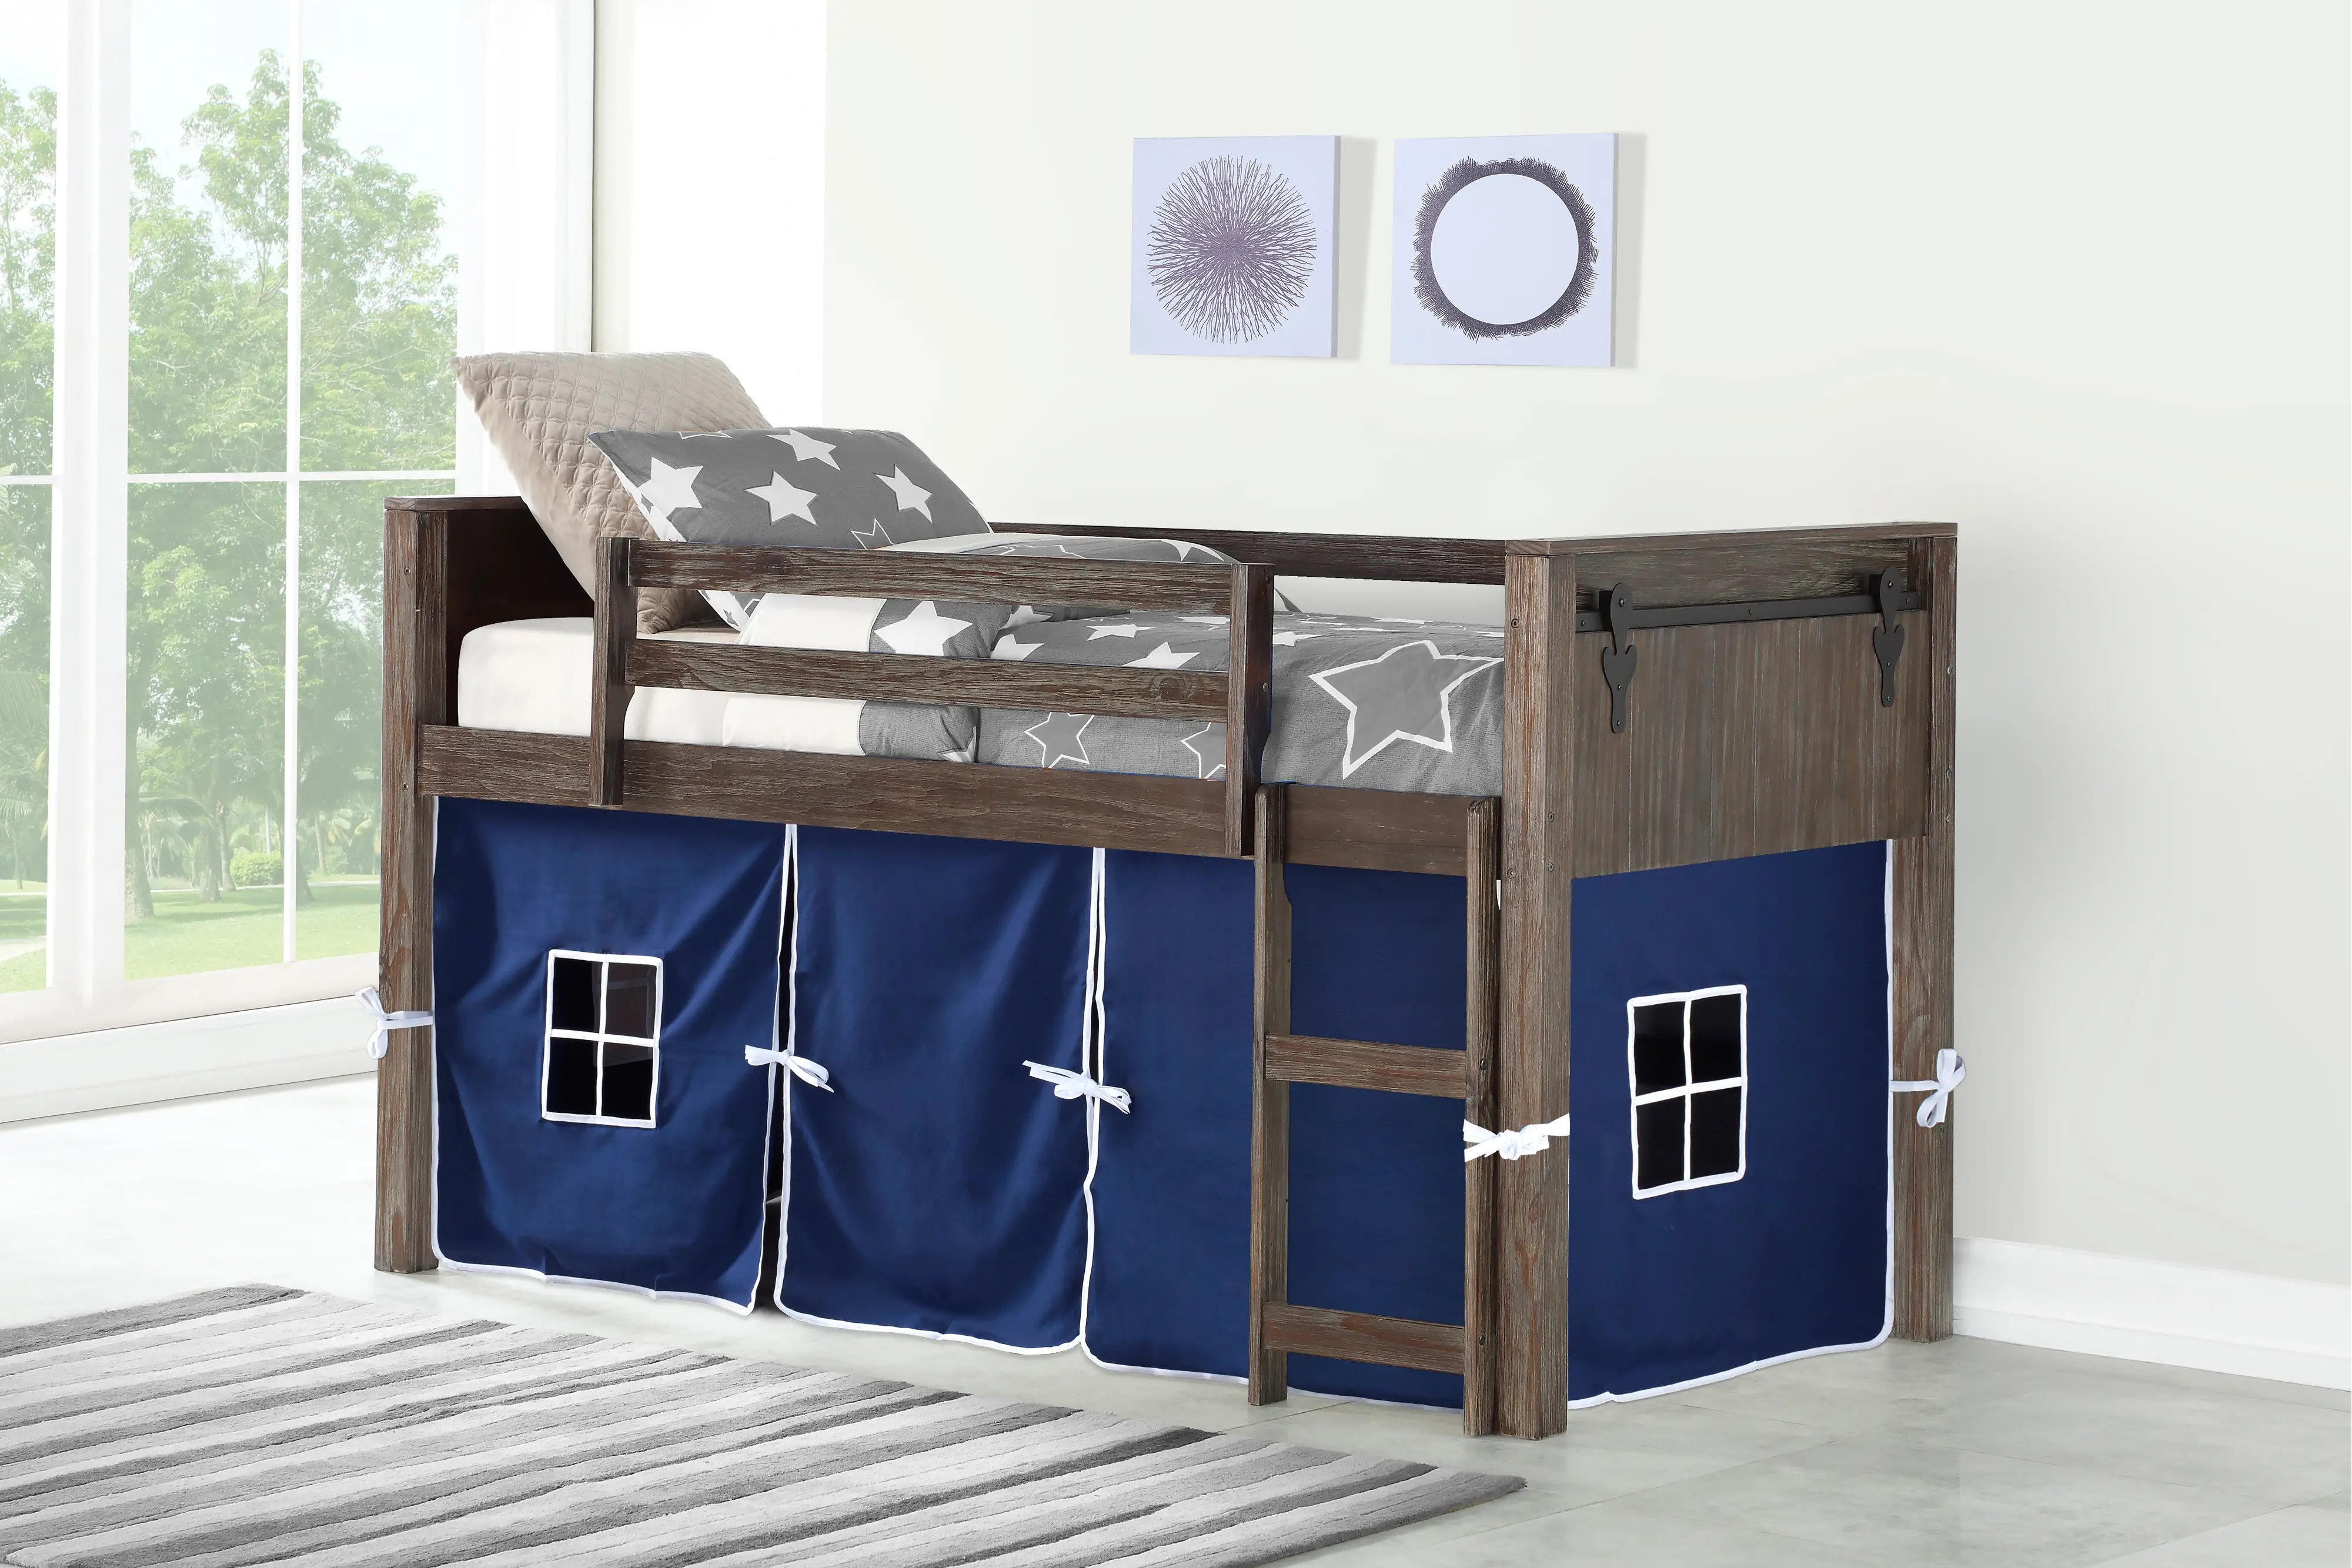 Brushed Brown Twin Loft Bed with Blue Tent - Barn Door